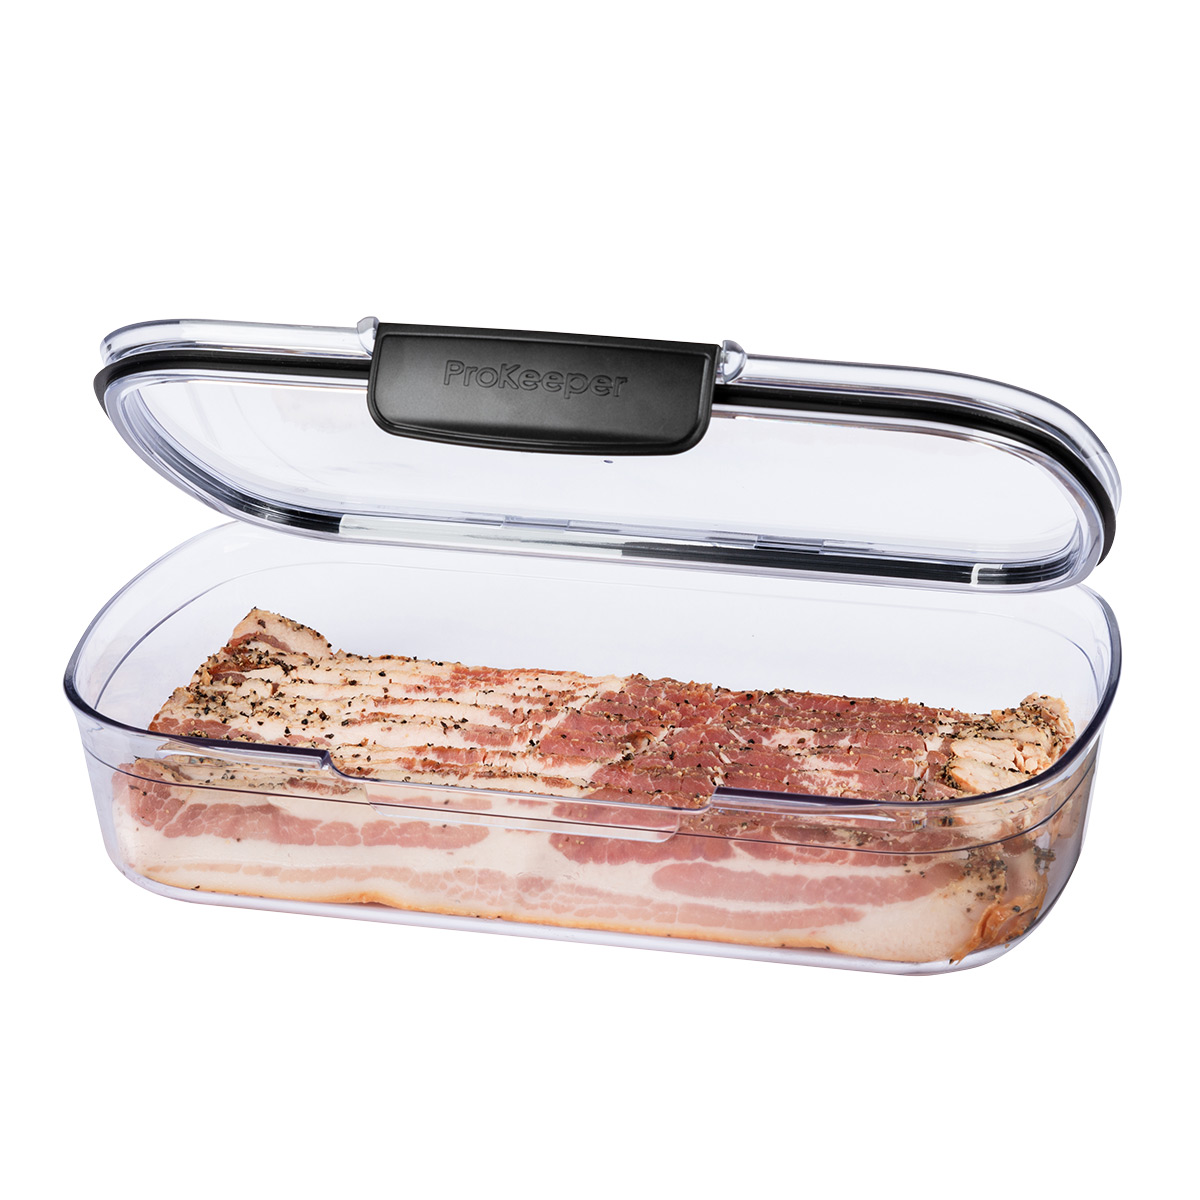 https://www.containerstore.com/catalogimages/474551/10091514-prokeeper-deli-large-ven1.jpg